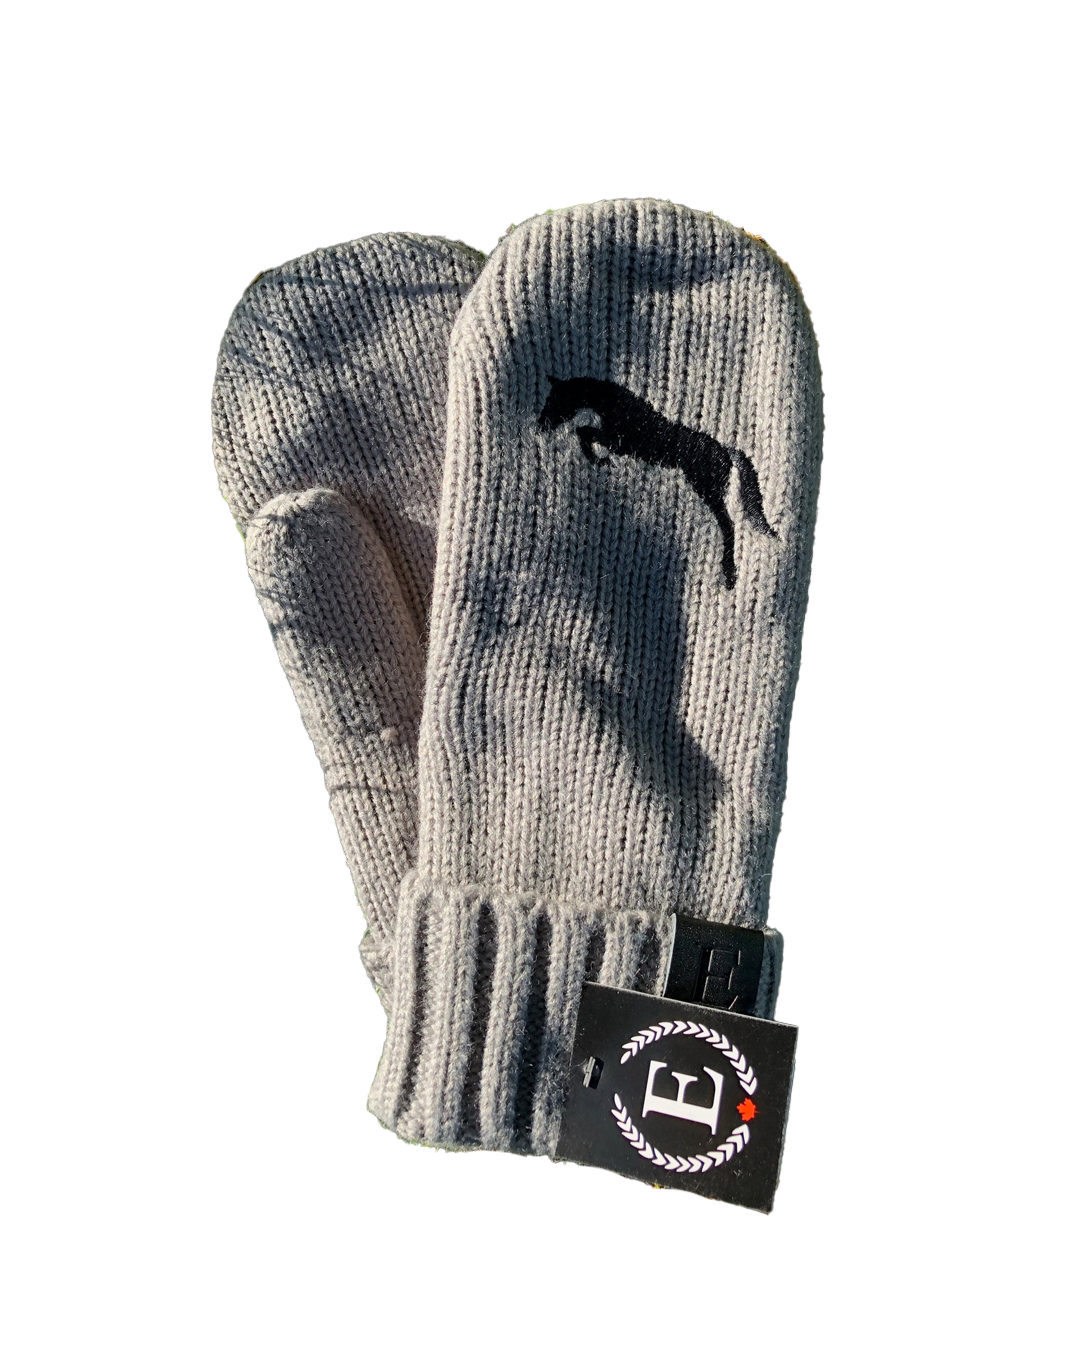 EFO Mittens Gloves EFO - Equestrian Fashion Outfitters